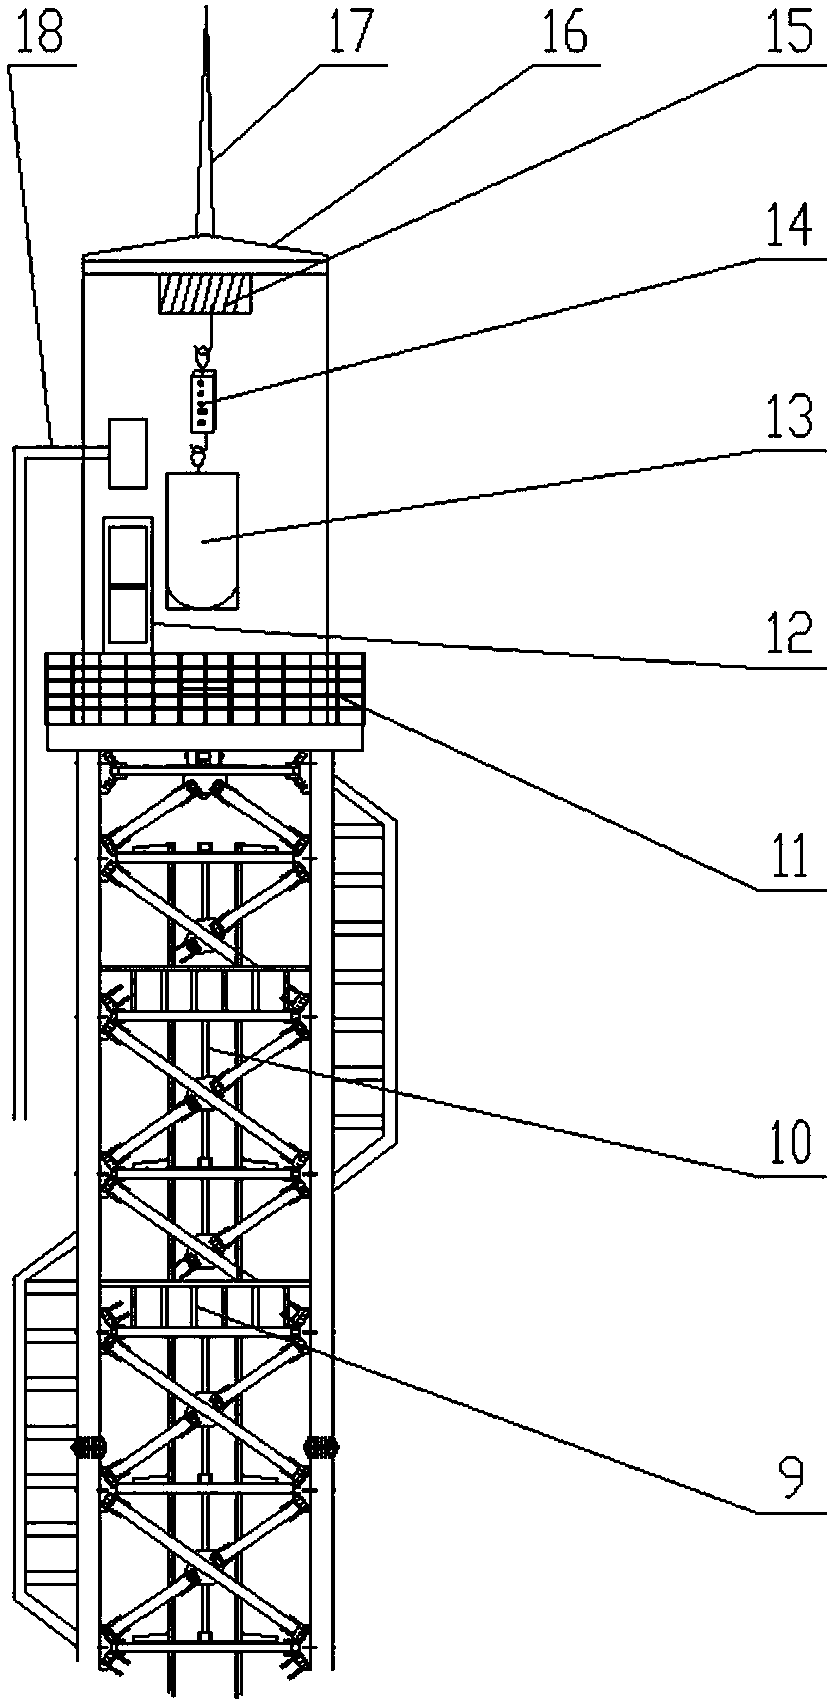 High-altitude falling test system for spent fuel storage and transportation container of nuclear power plant